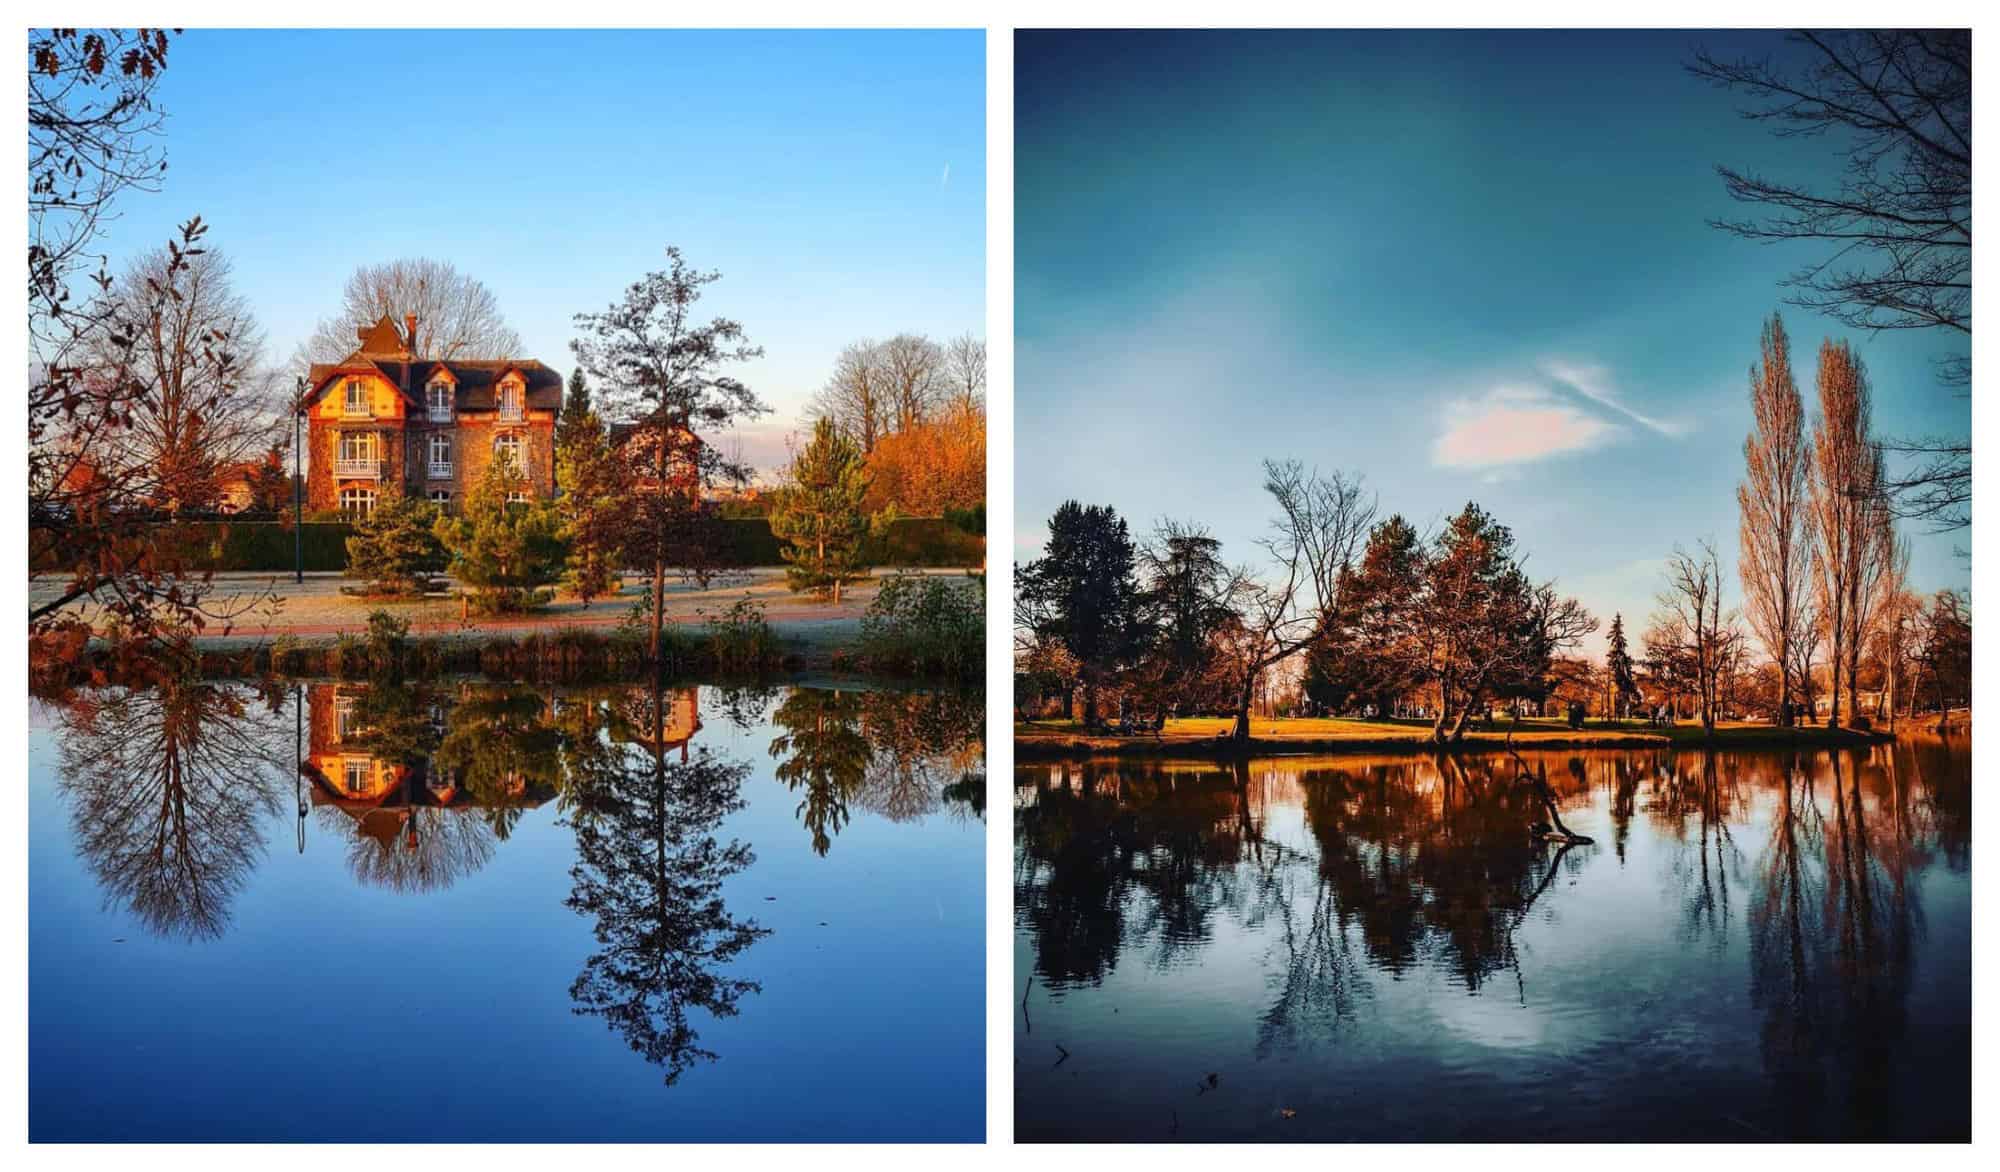 Two angles of the Parc des Ibis during a fall day with clear waters mirroring the blue sky, autumn trees, and a brown house.